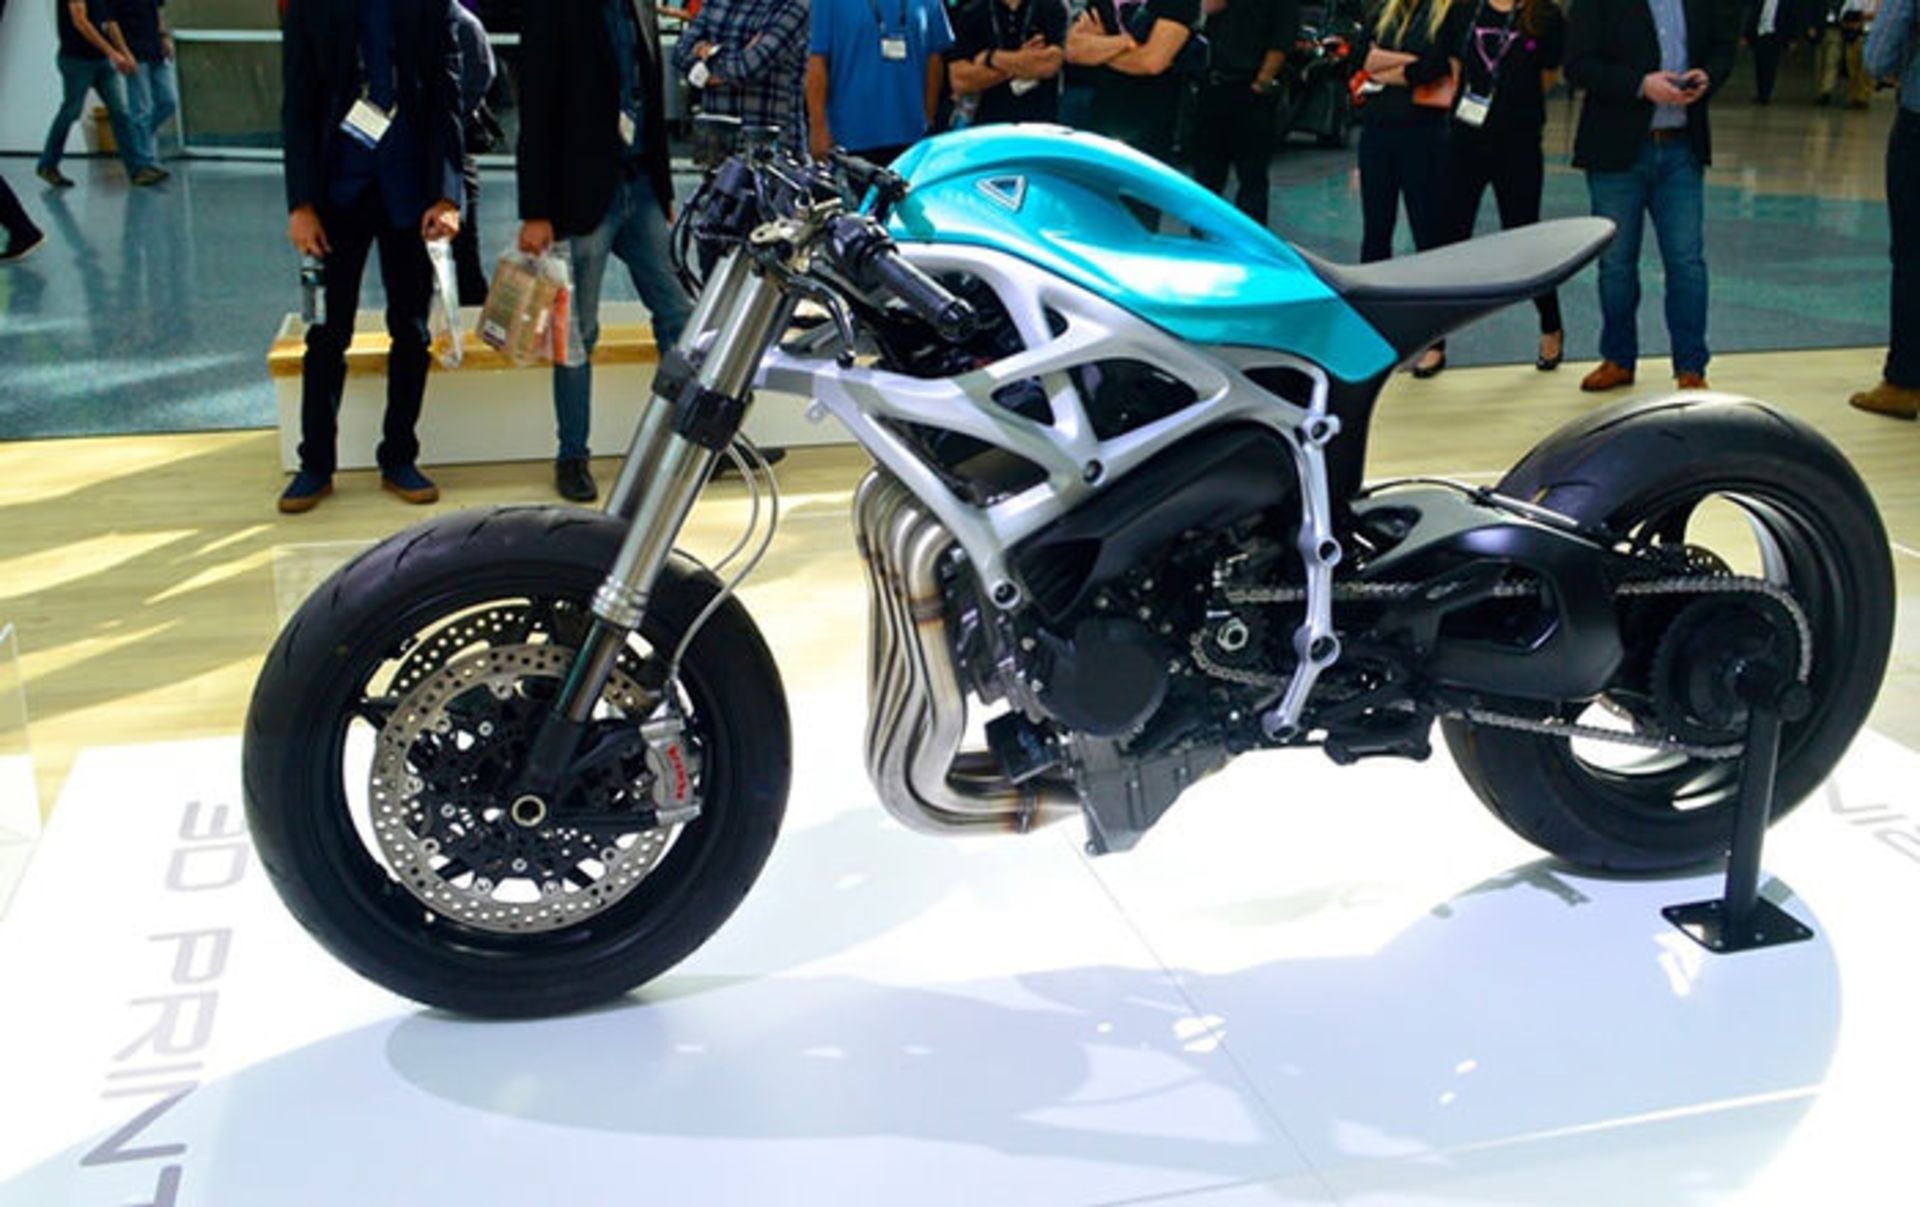 Airbus and Divergent's 3D printed motorcycles